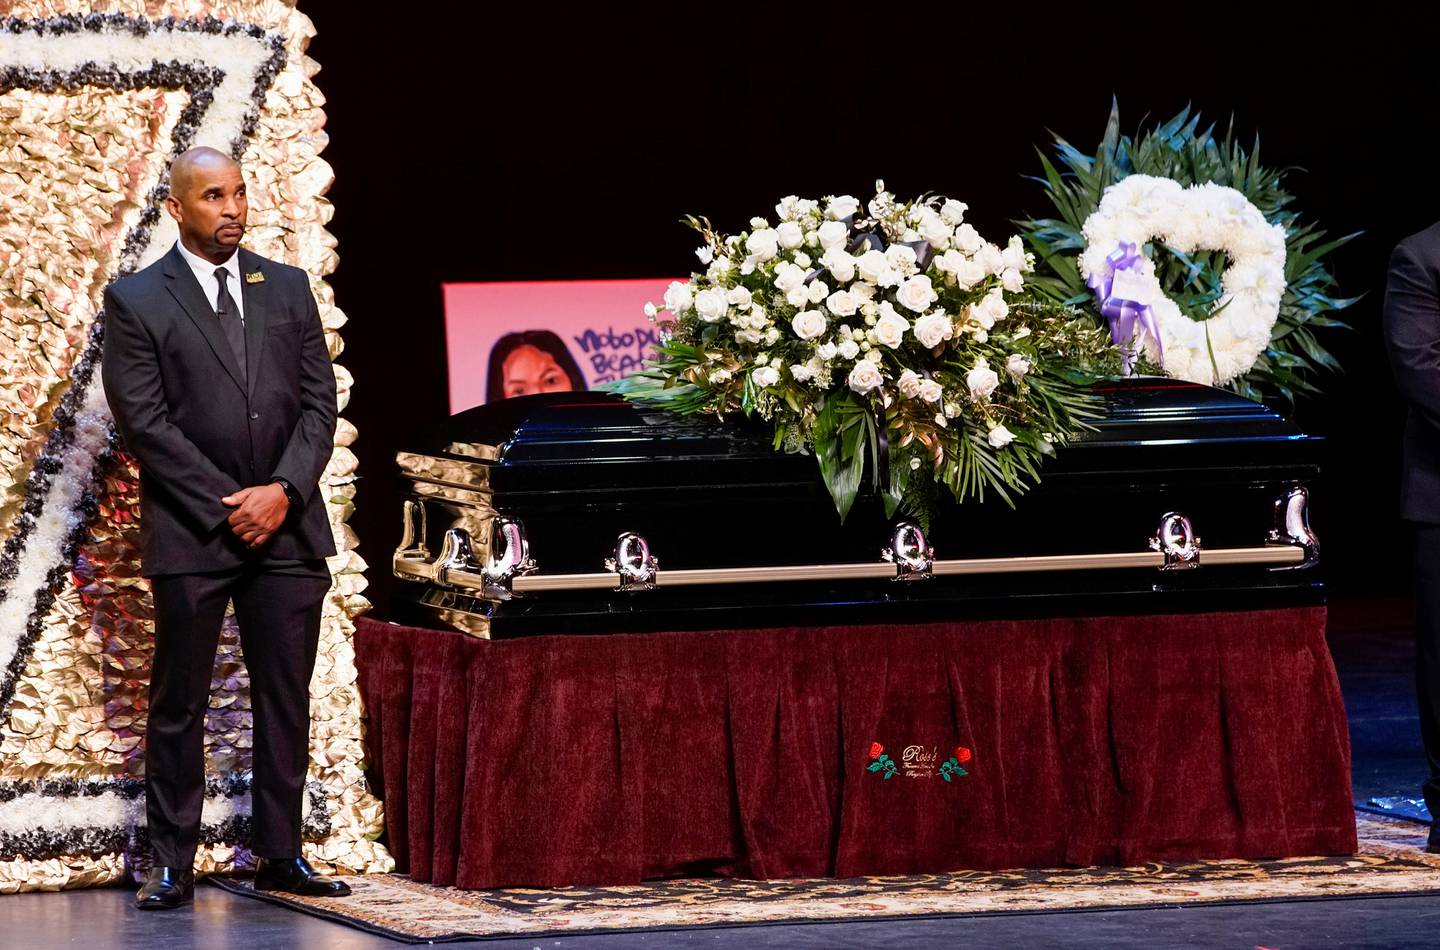 A man stands guard next to the casket for late rapper Marcel Theo Hall, known by his stage name Biz Markie, during the funeral service in Patchogue, New York, on August 2, 2021. Reuters